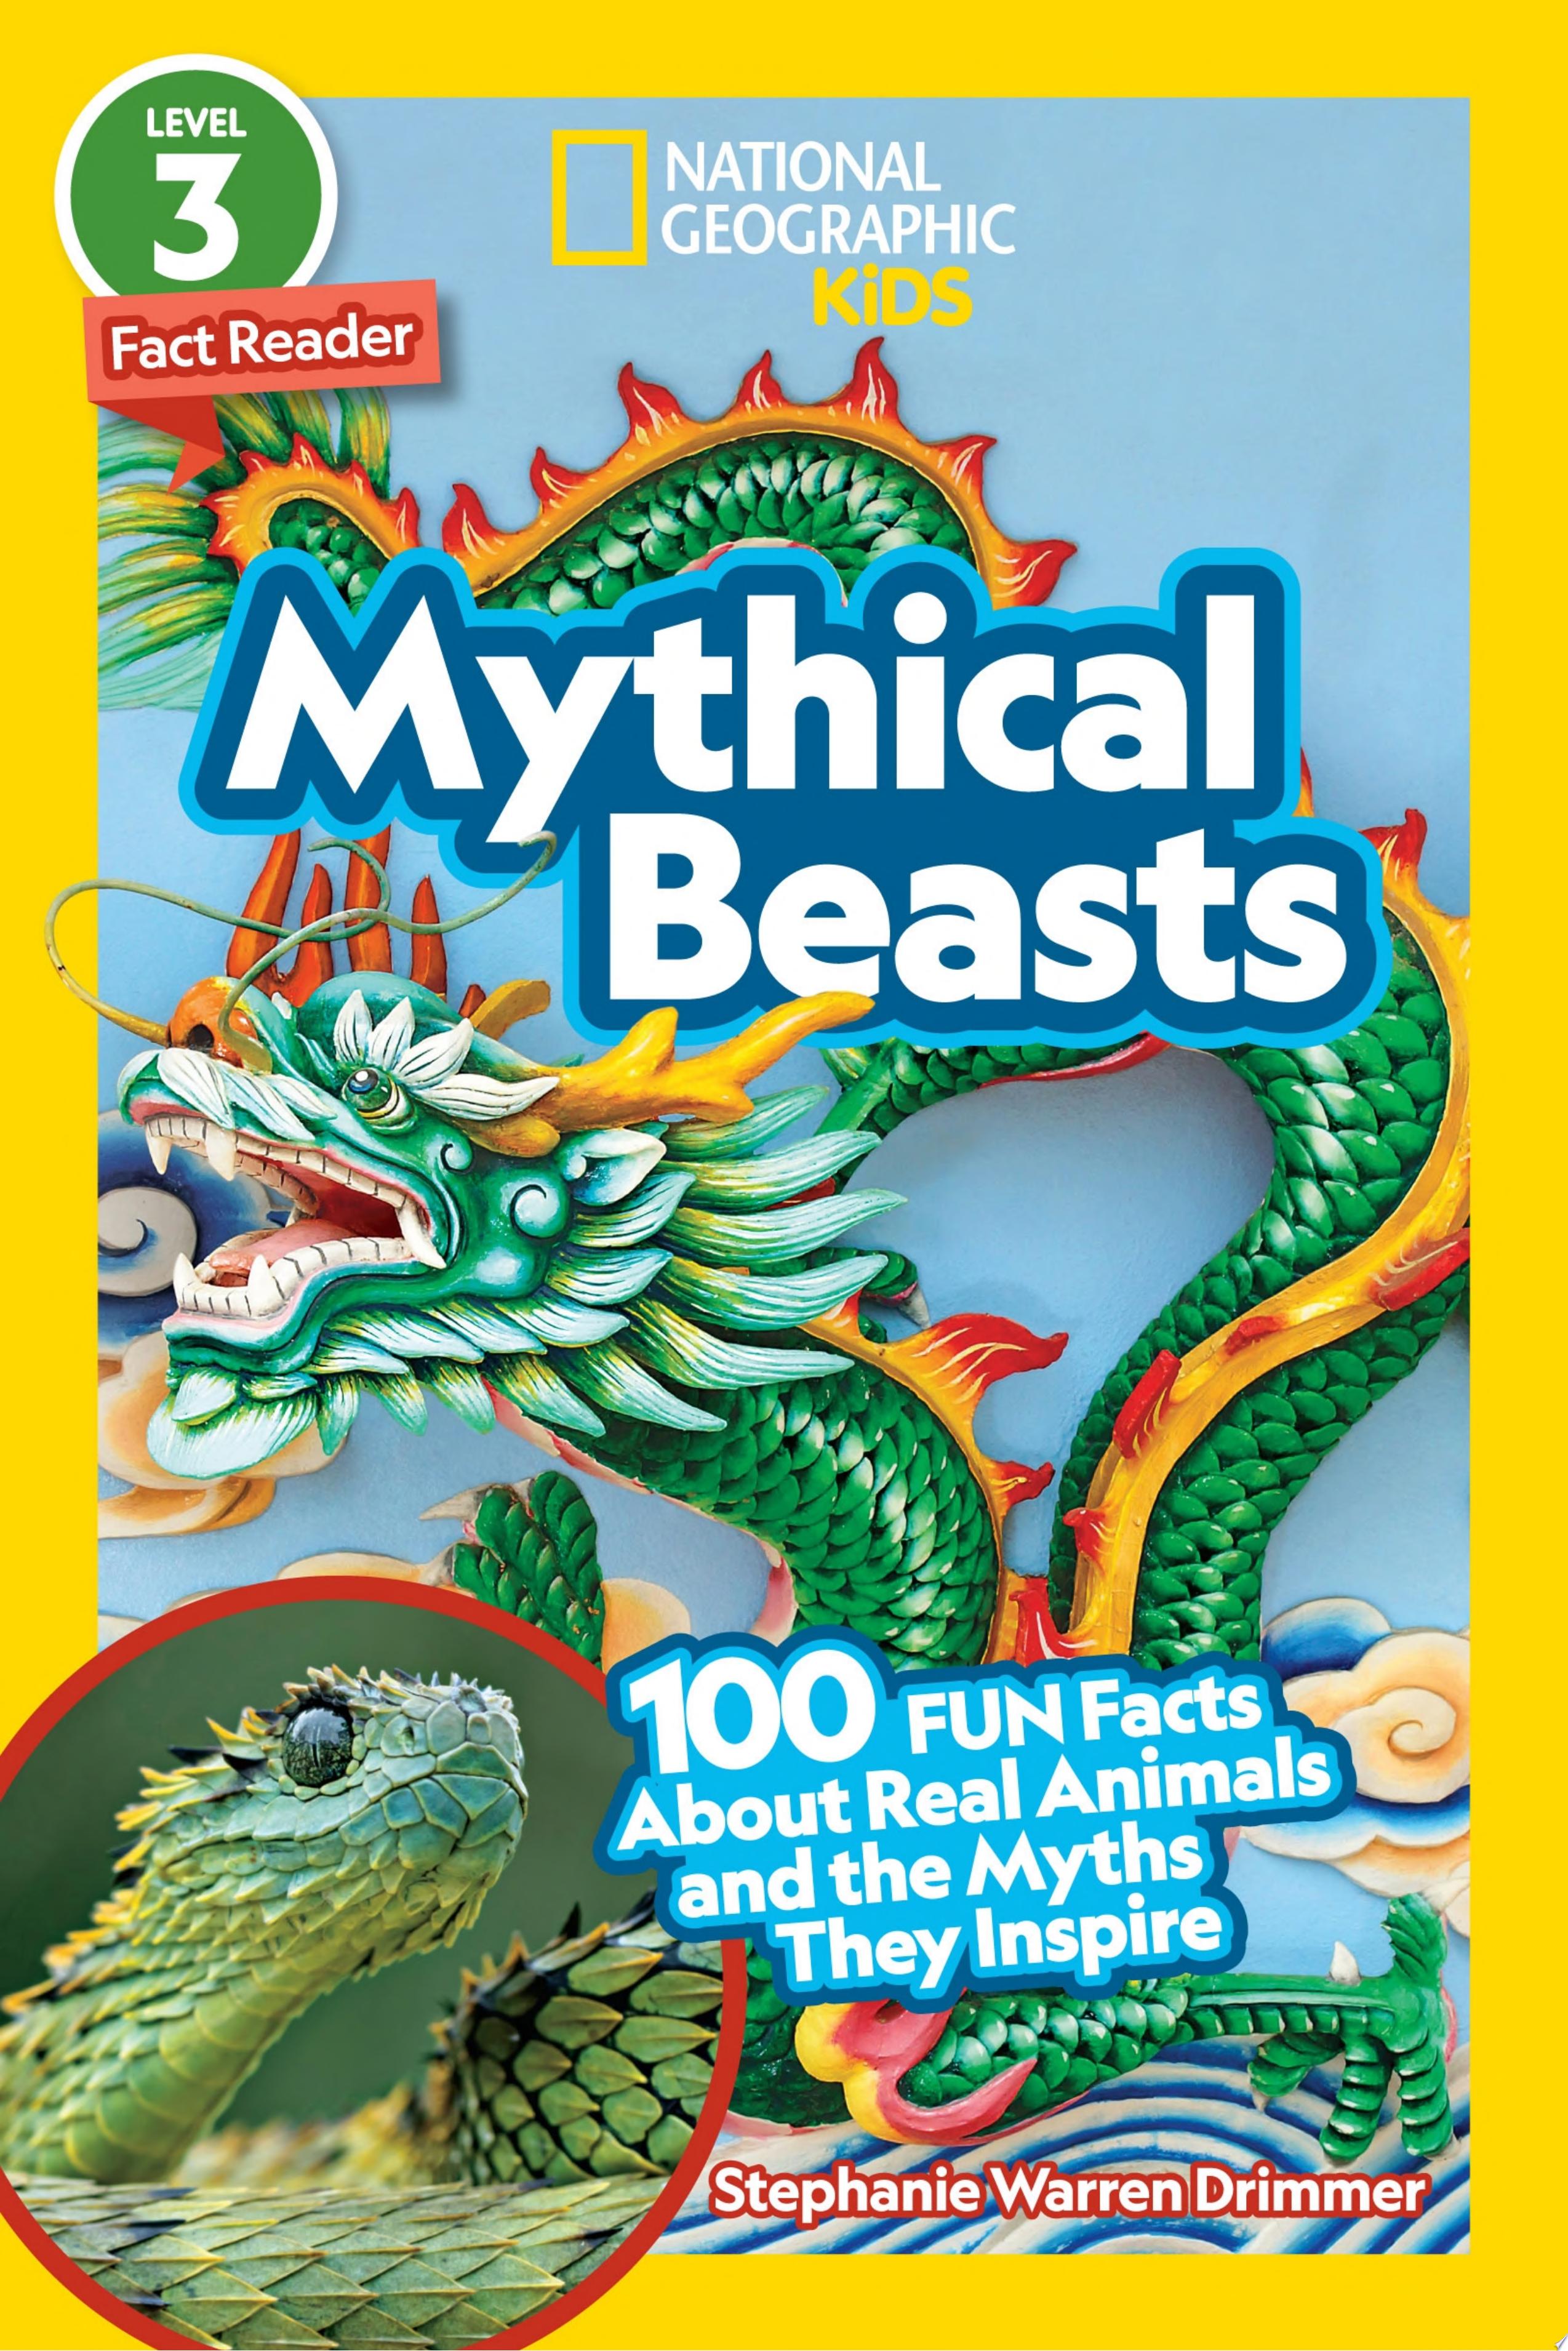 Image for "National Geographic Readers: Mythical Beasts (L3)"